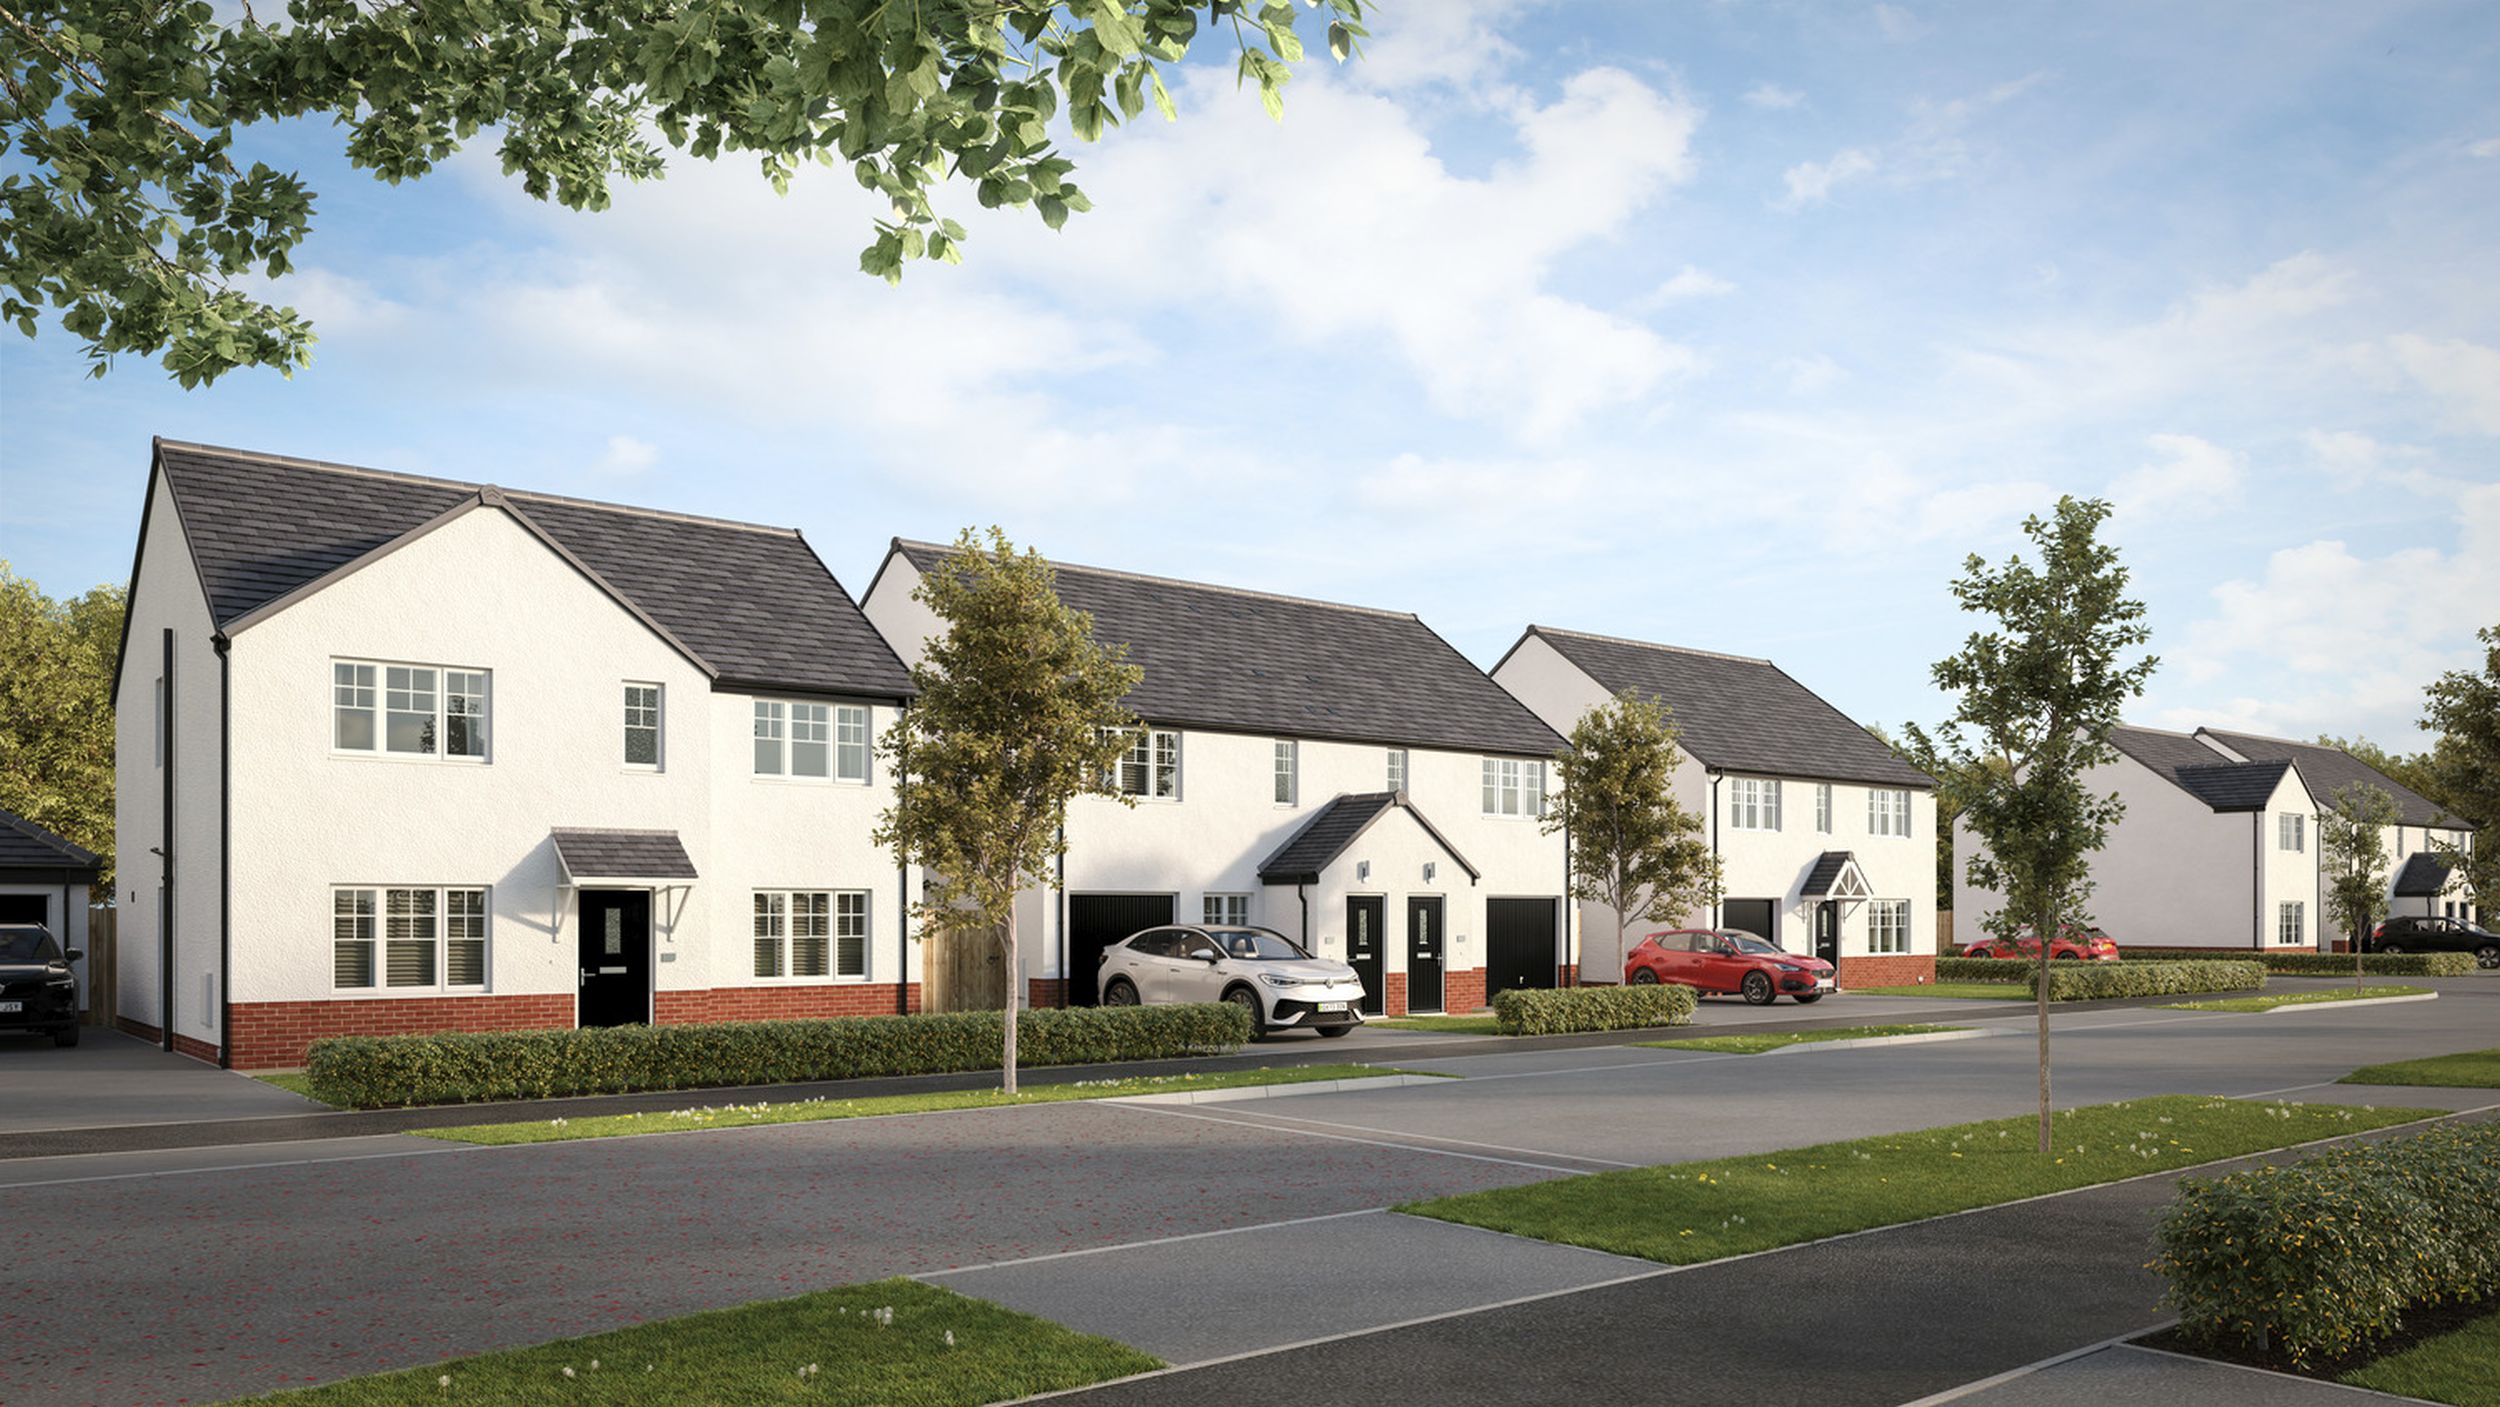 Avant Homes to build new 170 home development in Rosyth